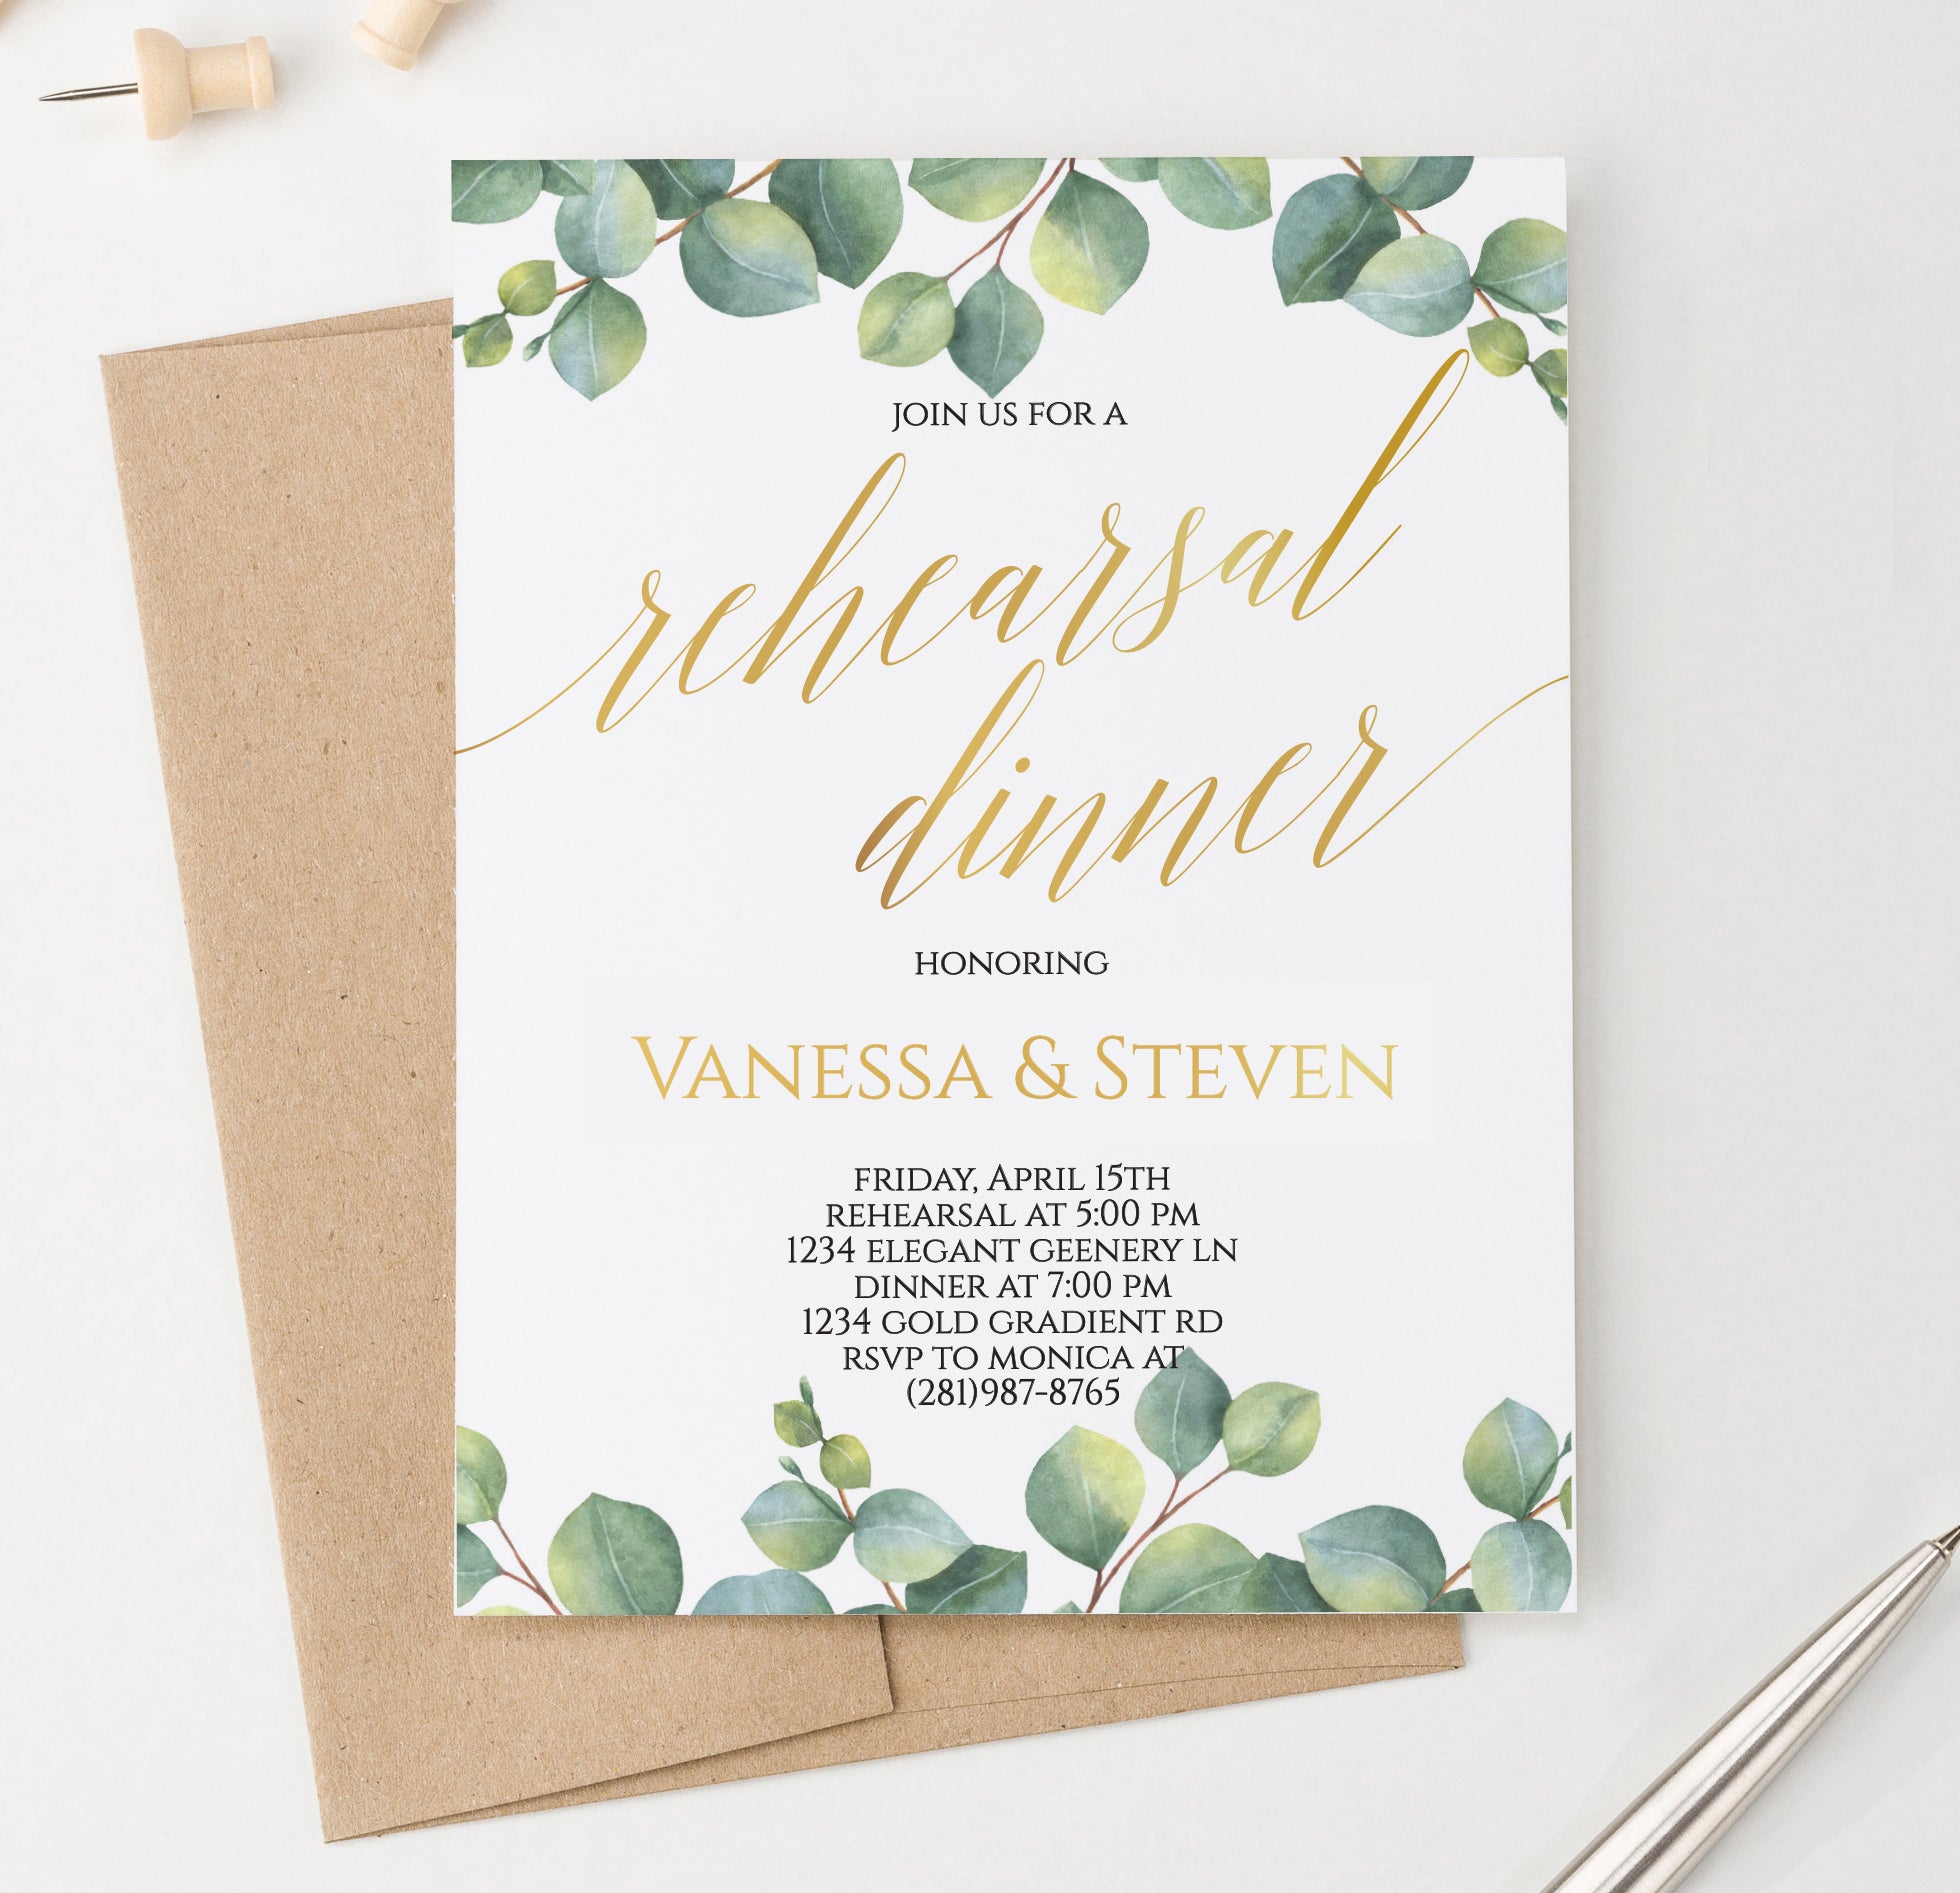 Personalized Greenery Rehearsal Dinner Invitations